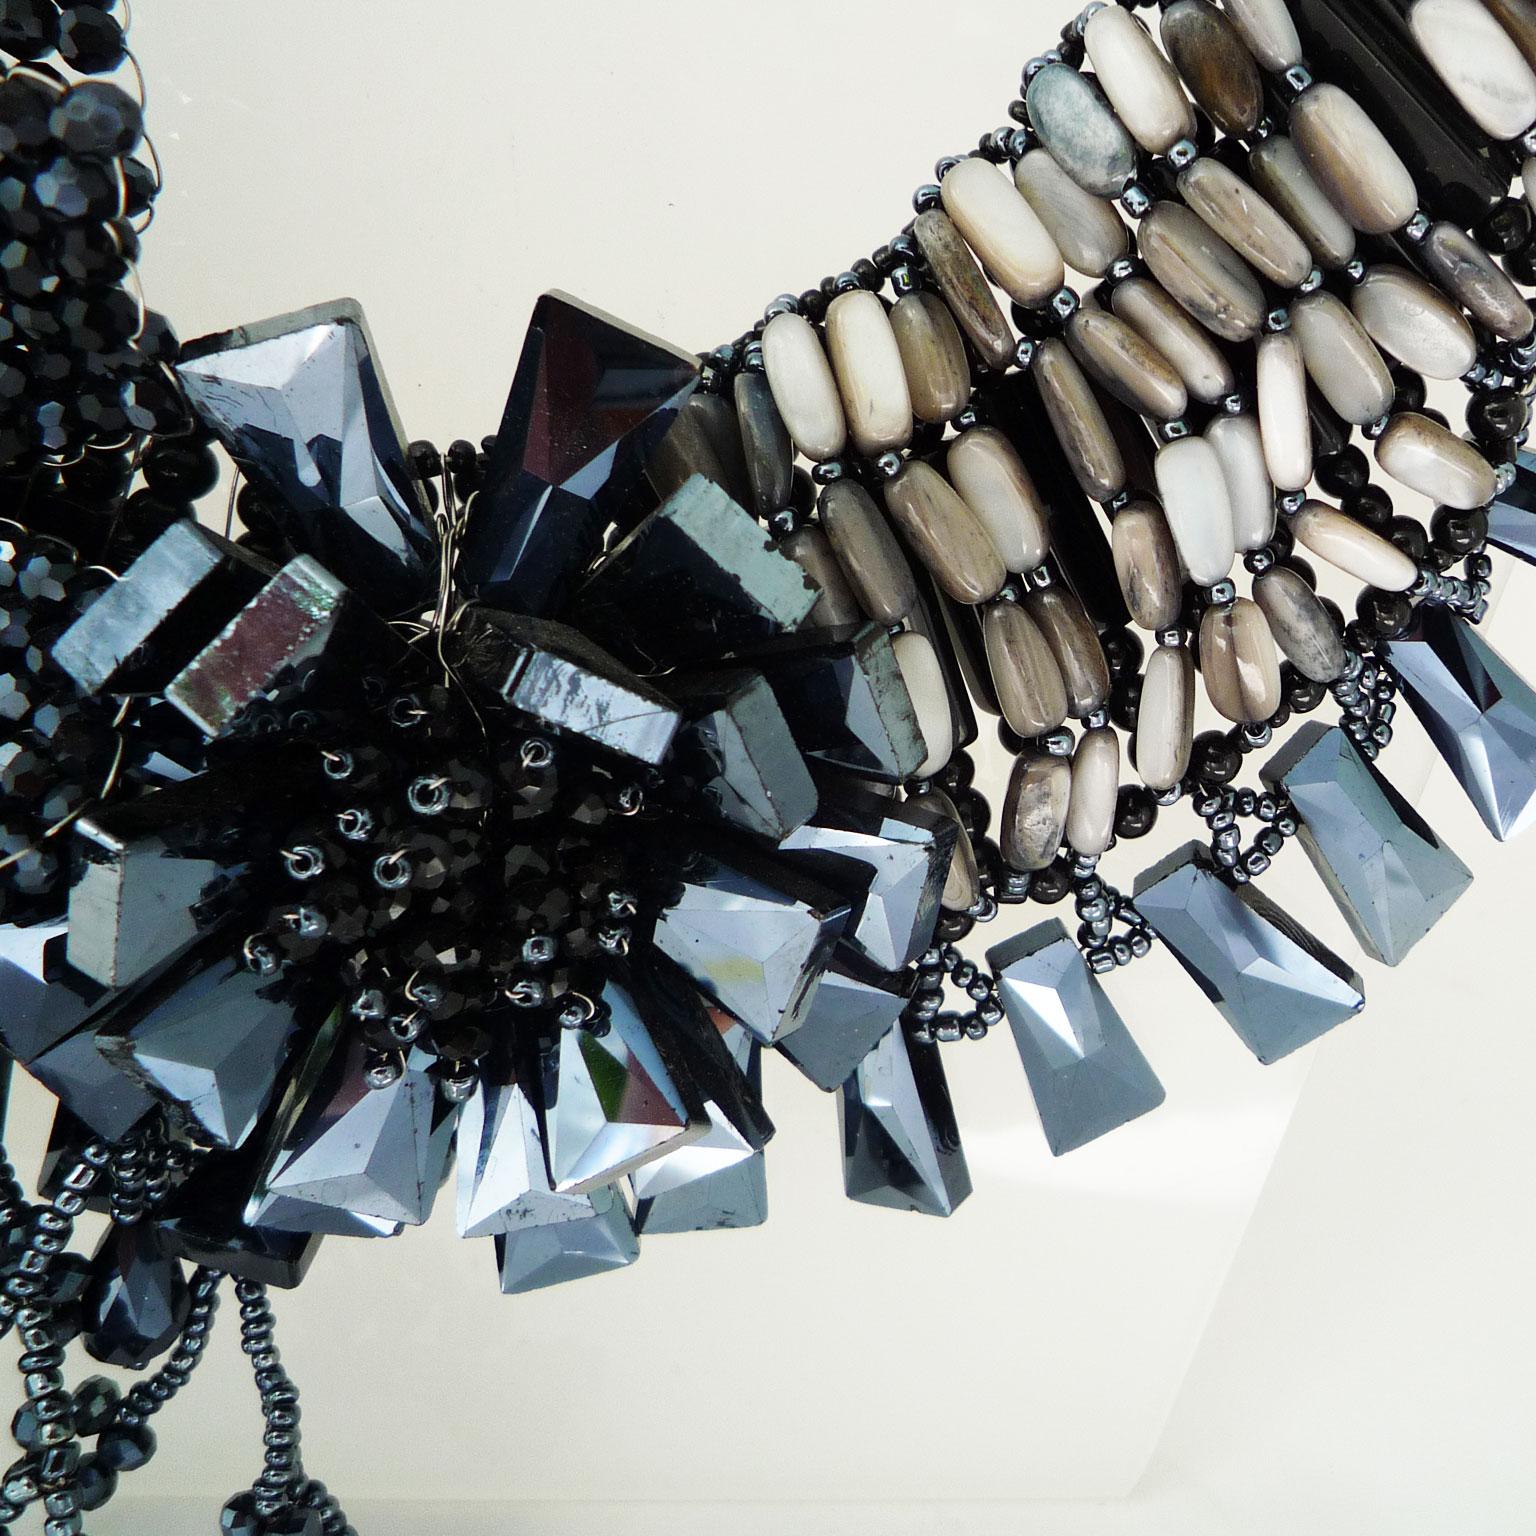 Necklace made of black limestone and black Swarovski pearls
Handmade chain made of black limestone. On the chain floral elements were artfully tied. 
The colour of pure, unadulterated limestone is white, and the presence of coal and bitumen in the